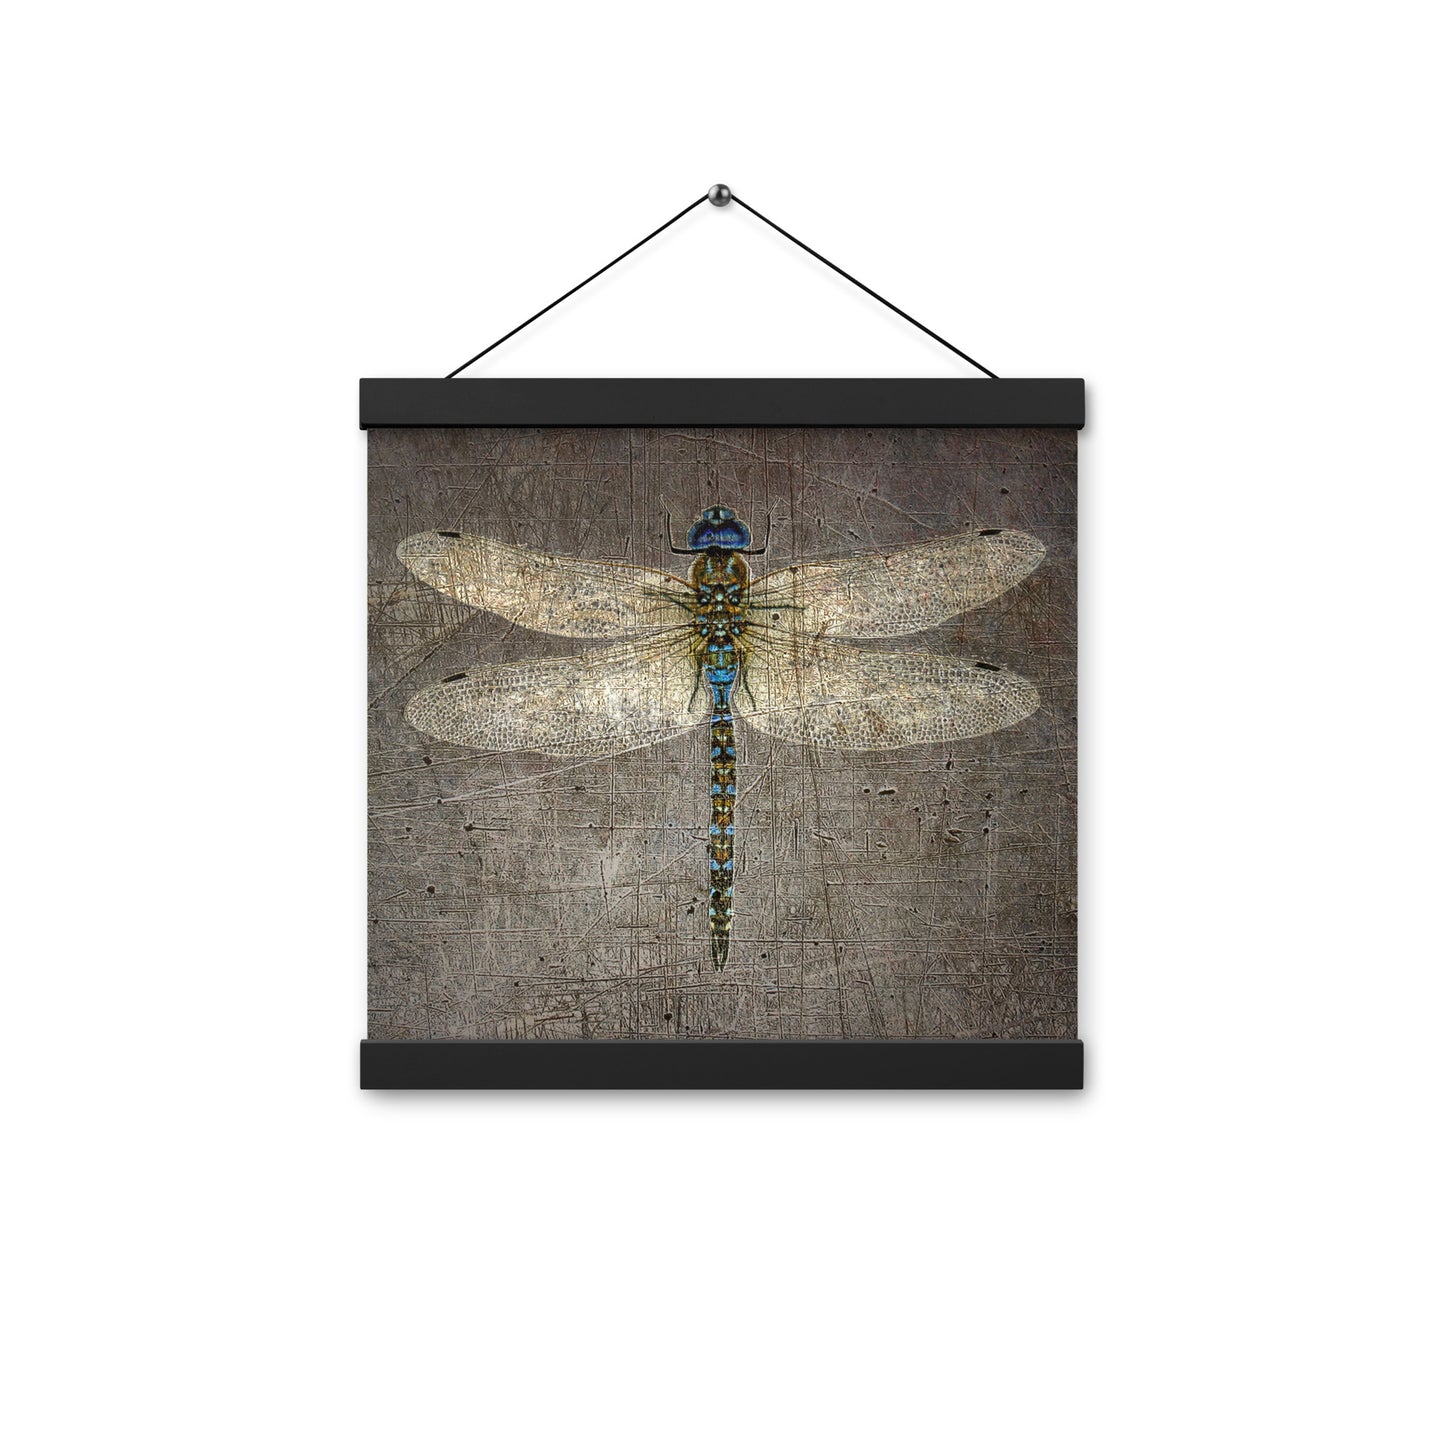 Dragonfly Themed Wall Hanging Dragonfly on Distressed Stone Background Print on Archival Paper with Magnetic Wood Hangers 12x12